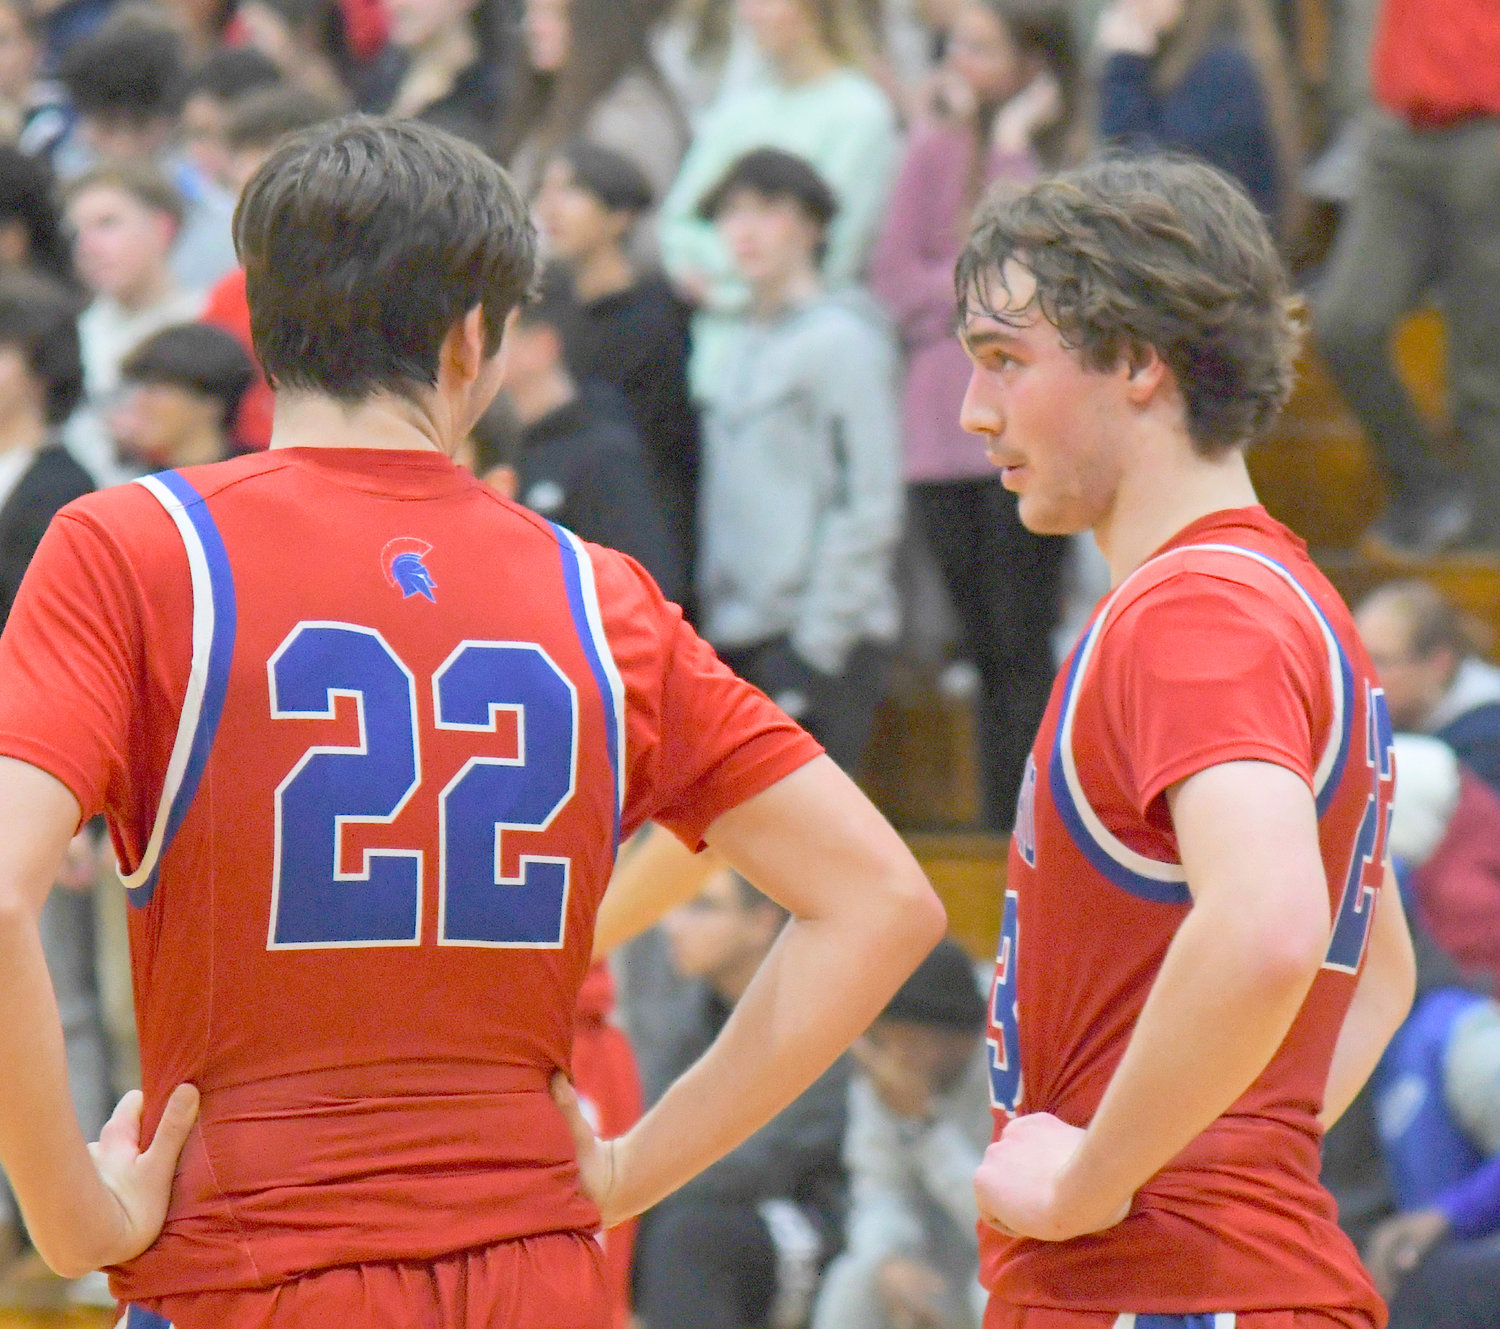 Zach Philipkoski, right, talks with teammate Colton Suriano during Tuesday's win over Proctor. Philipkoski and Suriano are each seniors for the Spartans.